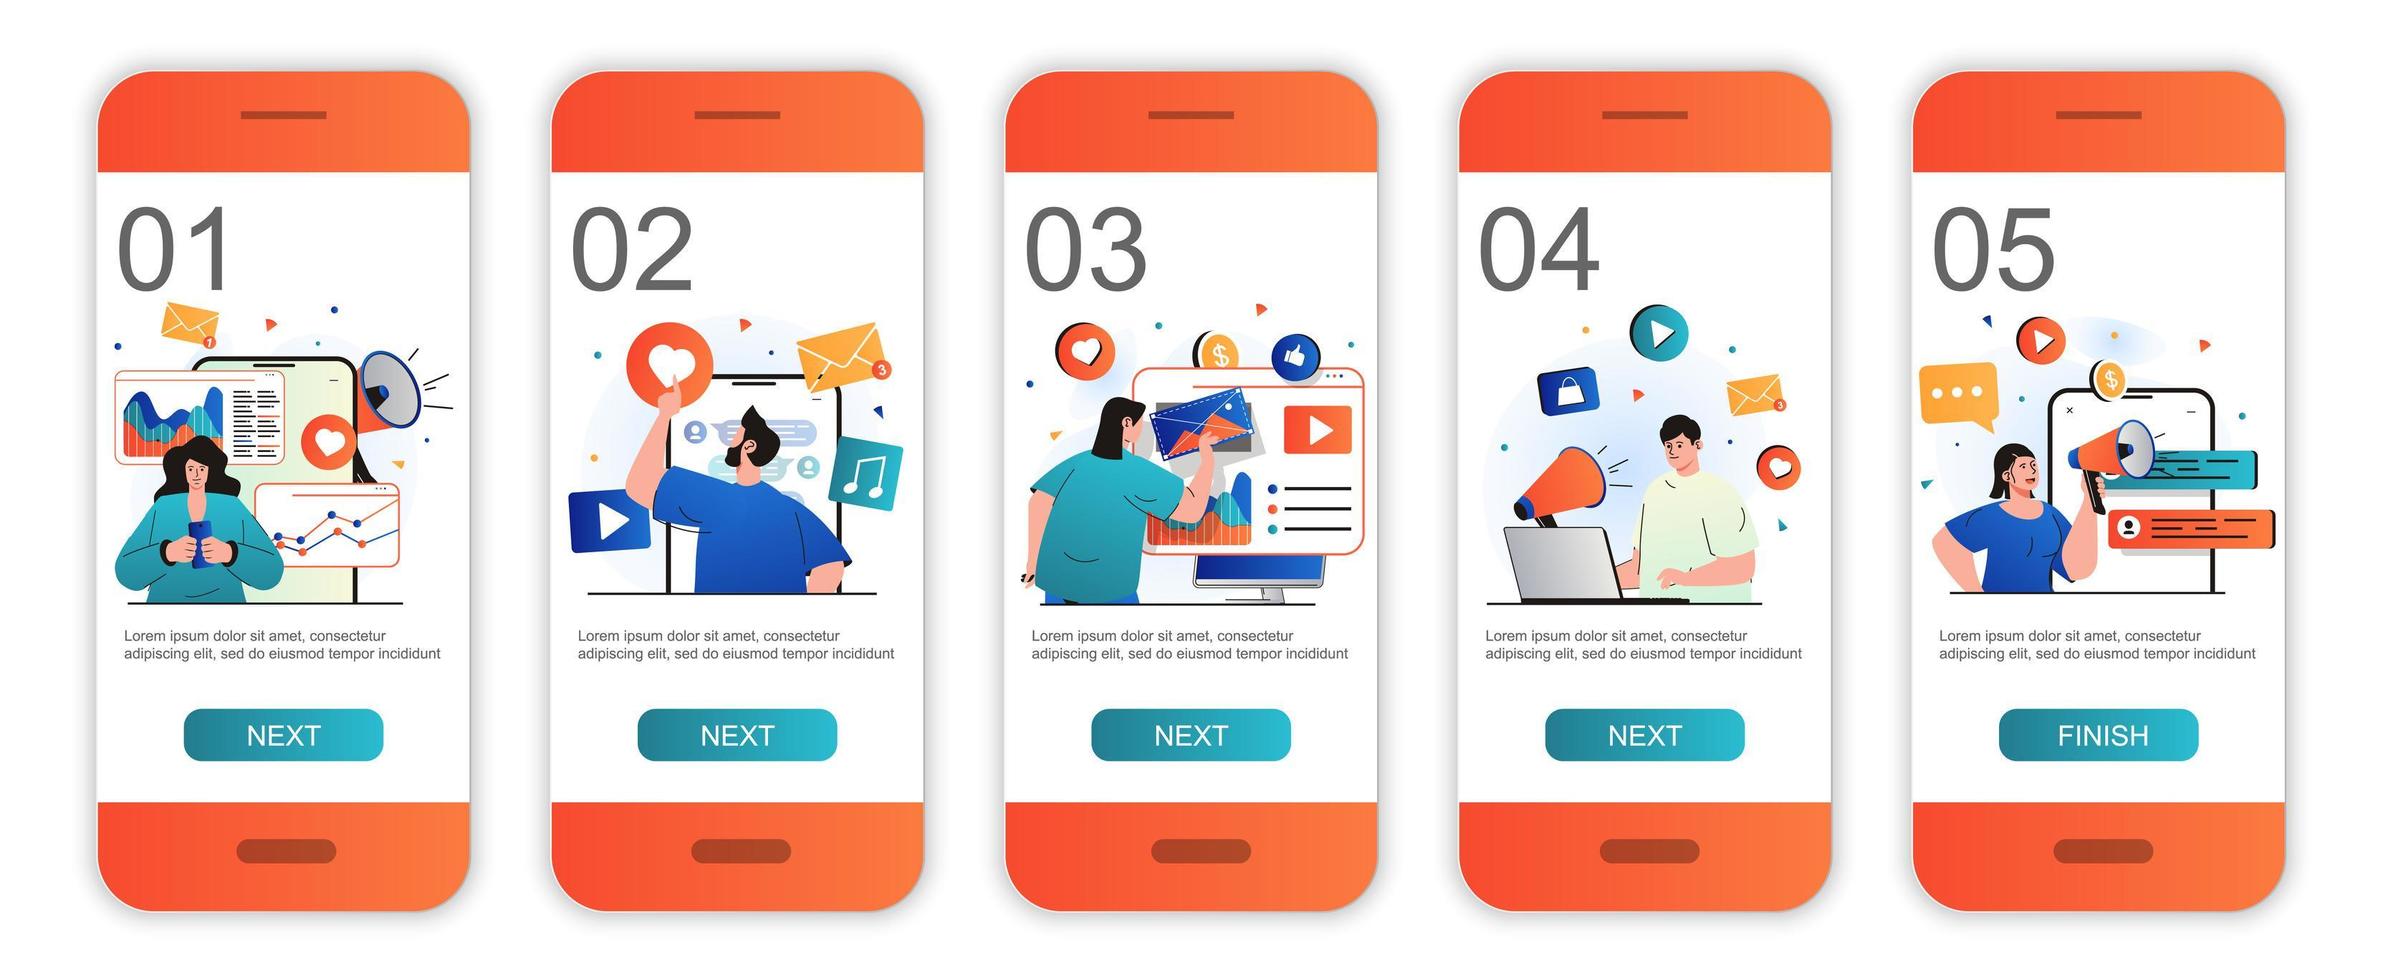 Digital marketing concept onboarding screens for mobile app templates. Advertising promotion. Modern UI, UX, GUI screens user interface kit with people scenes for web design. Vector illustration